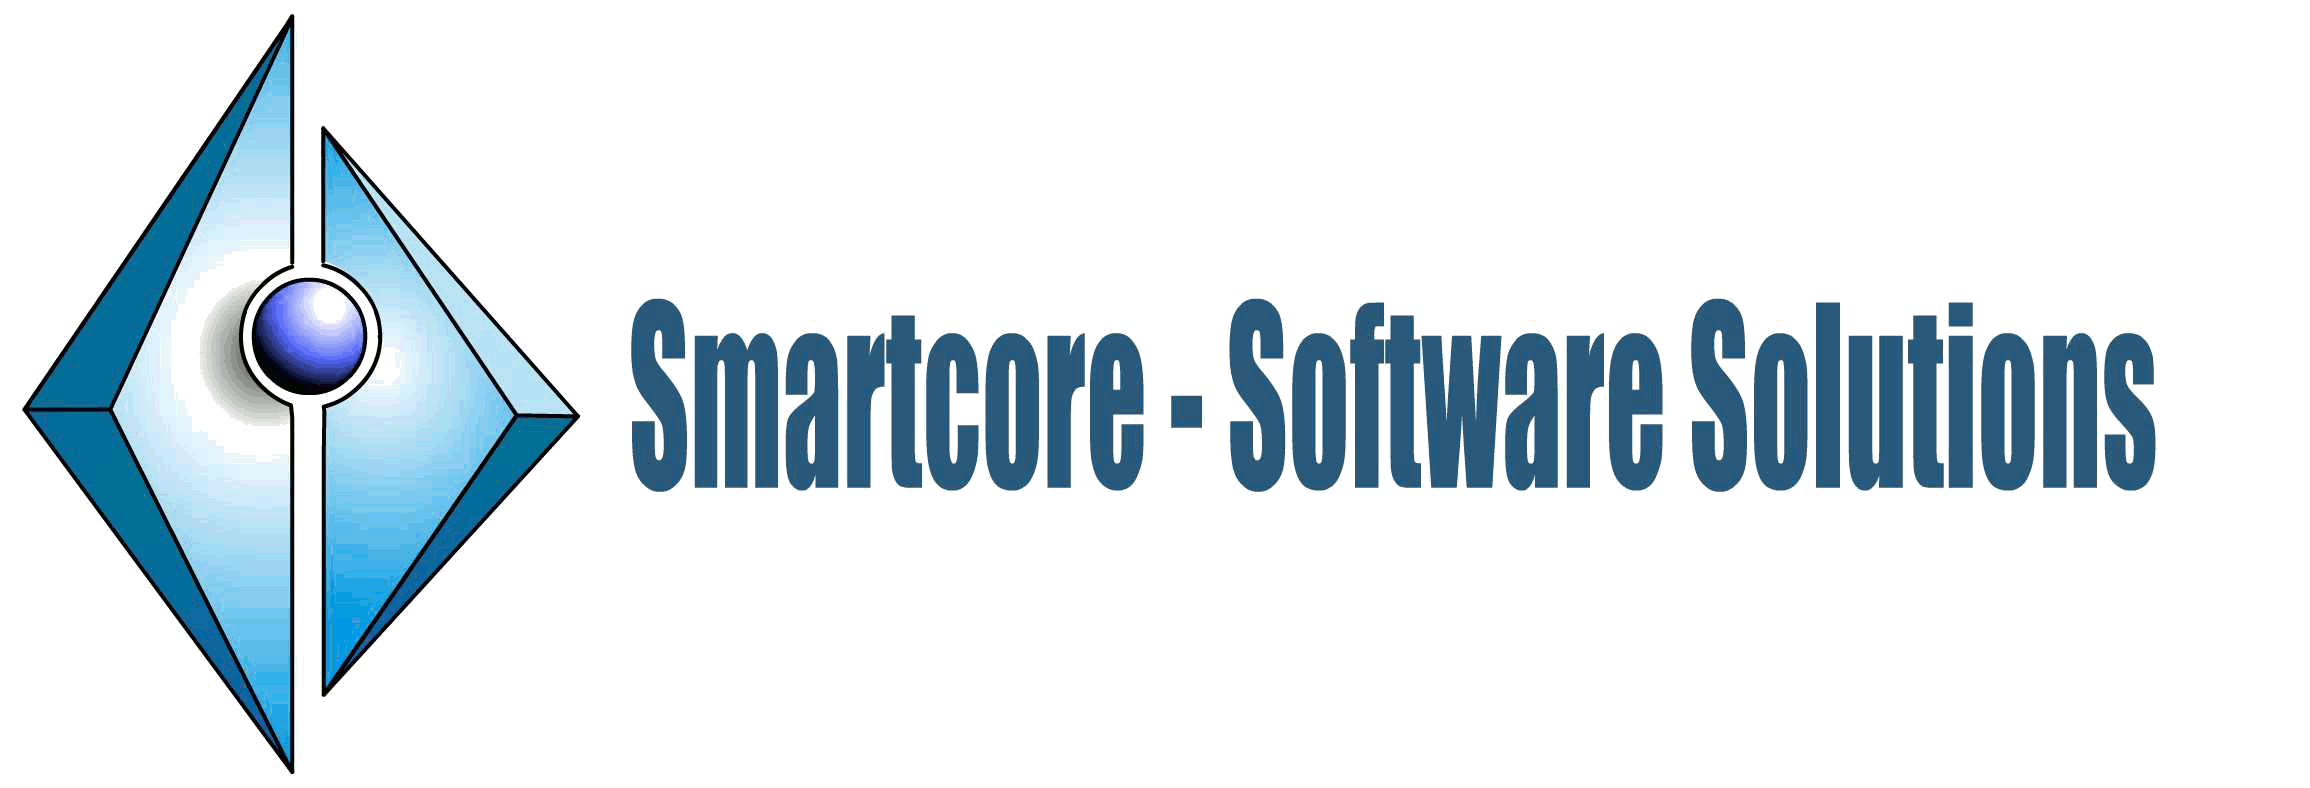 Smartcore - Software Solutions